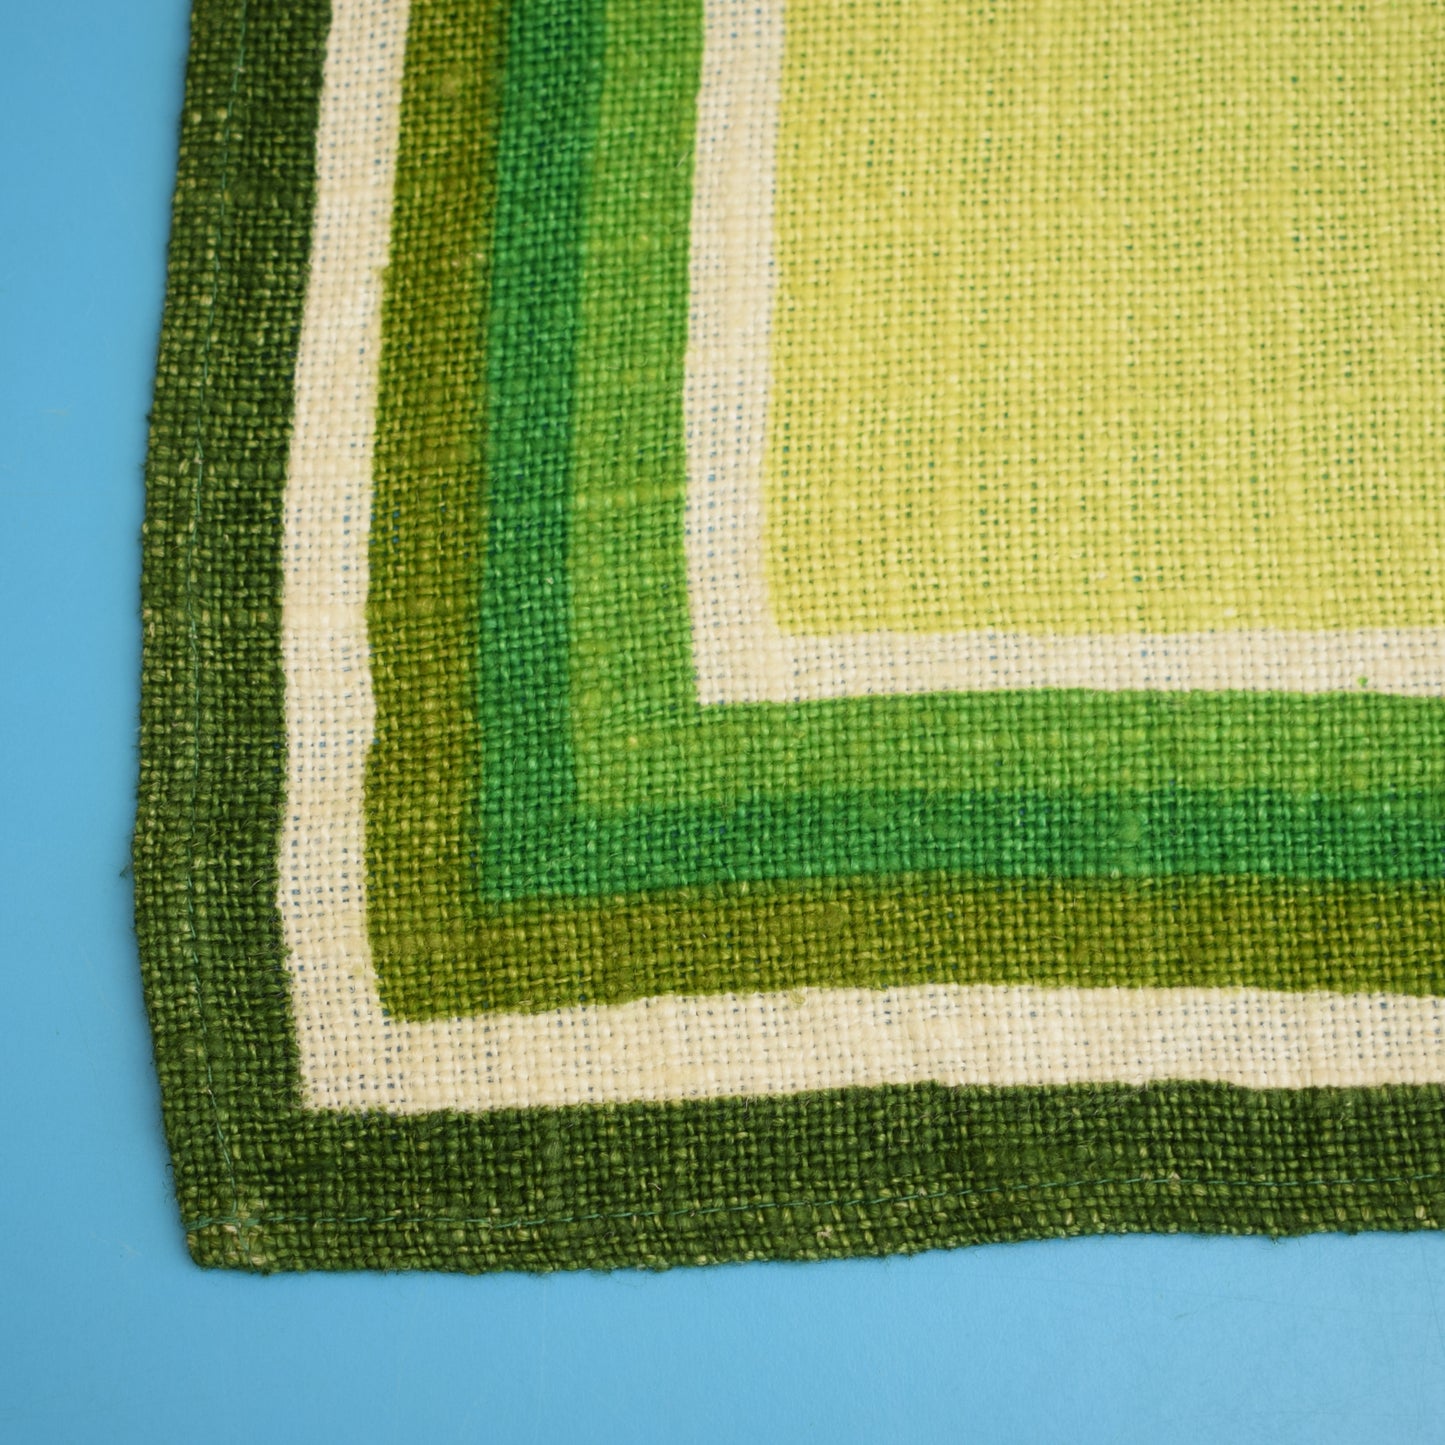 Vintage 1970s Pair Of Linen Placemats - Green